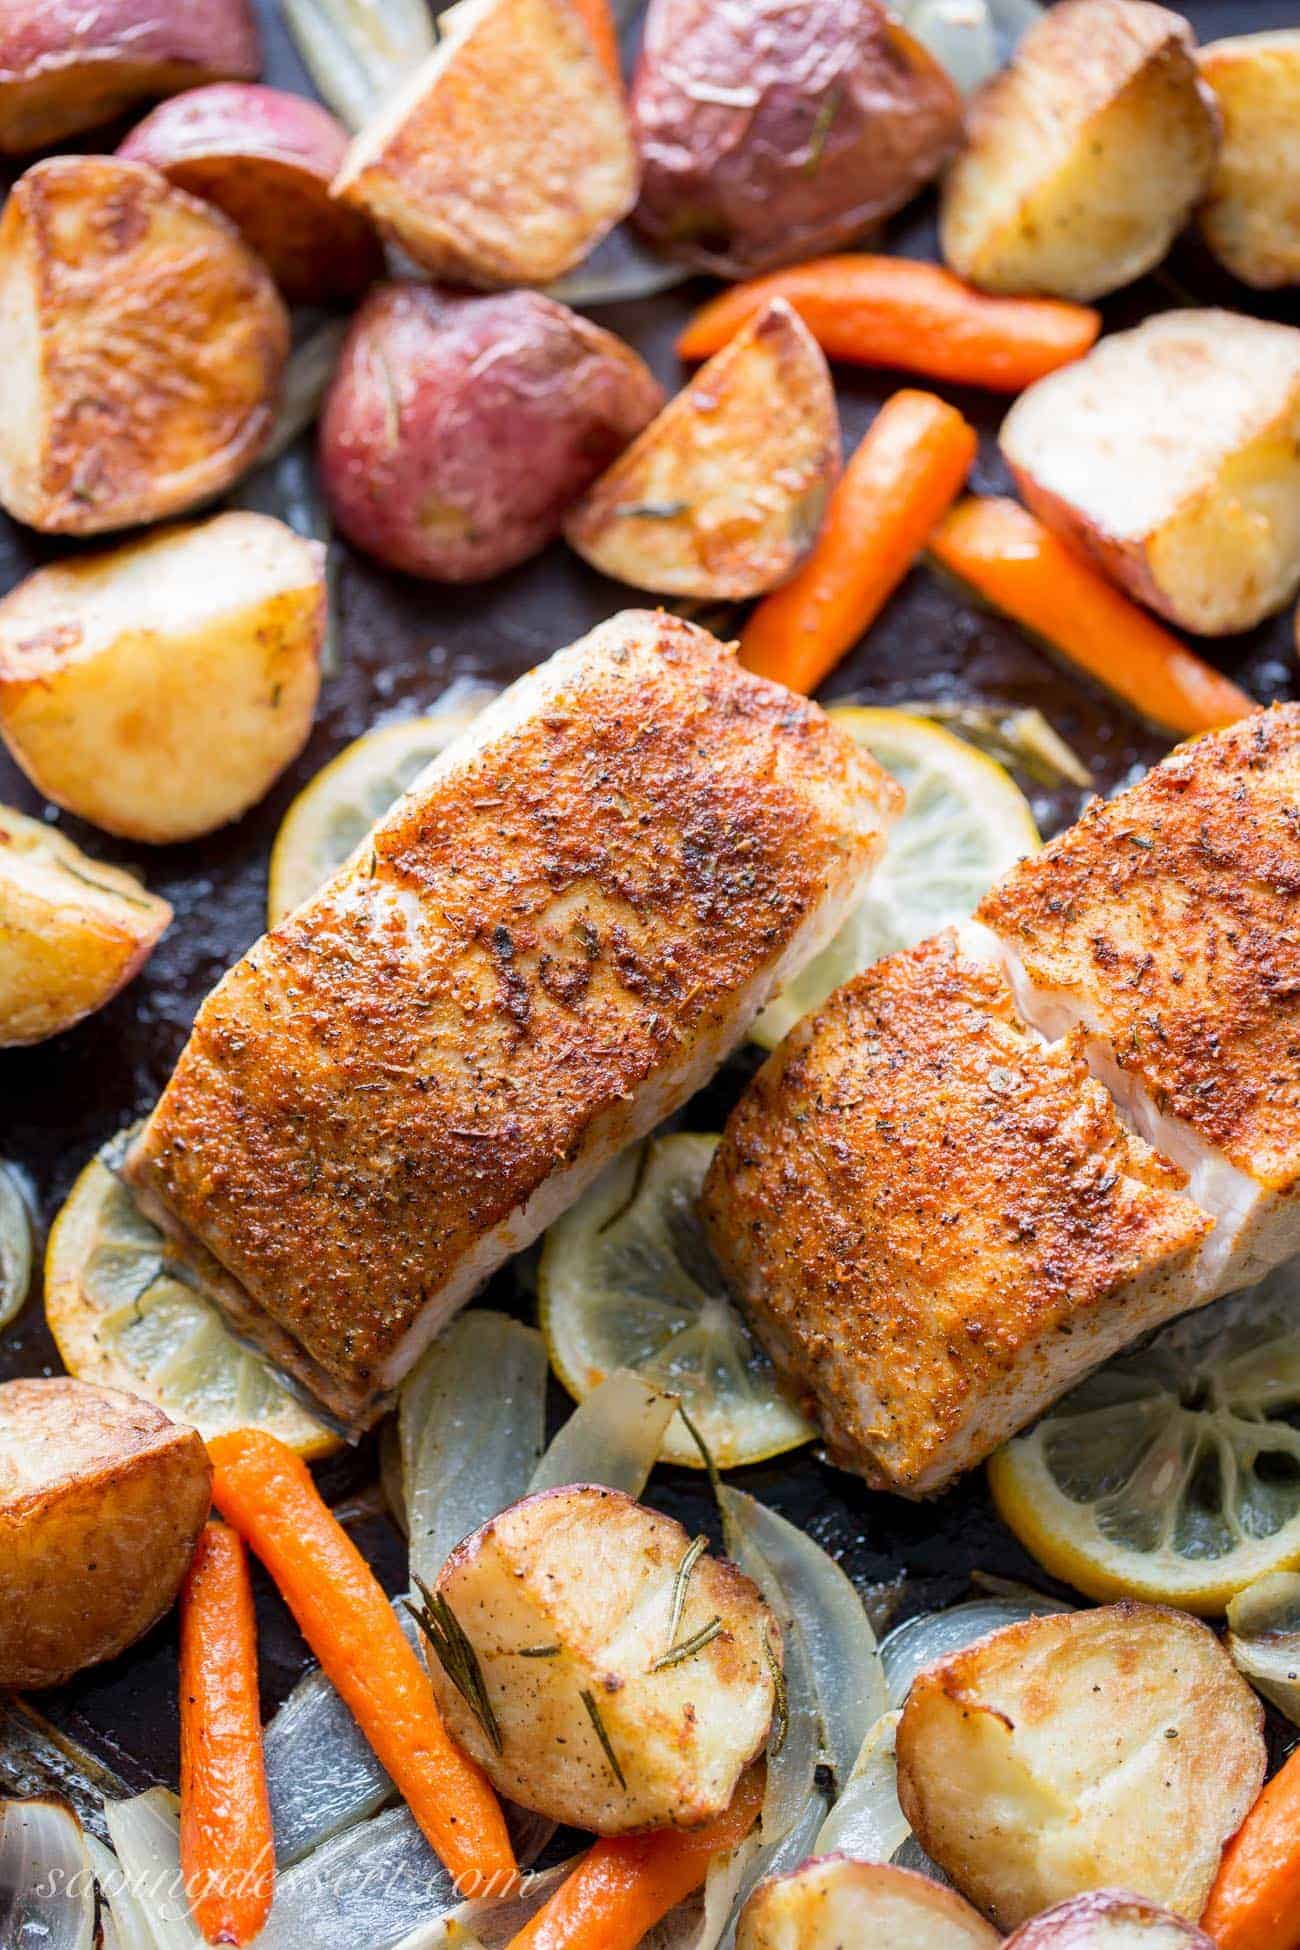 Baked fish and vegetables. 